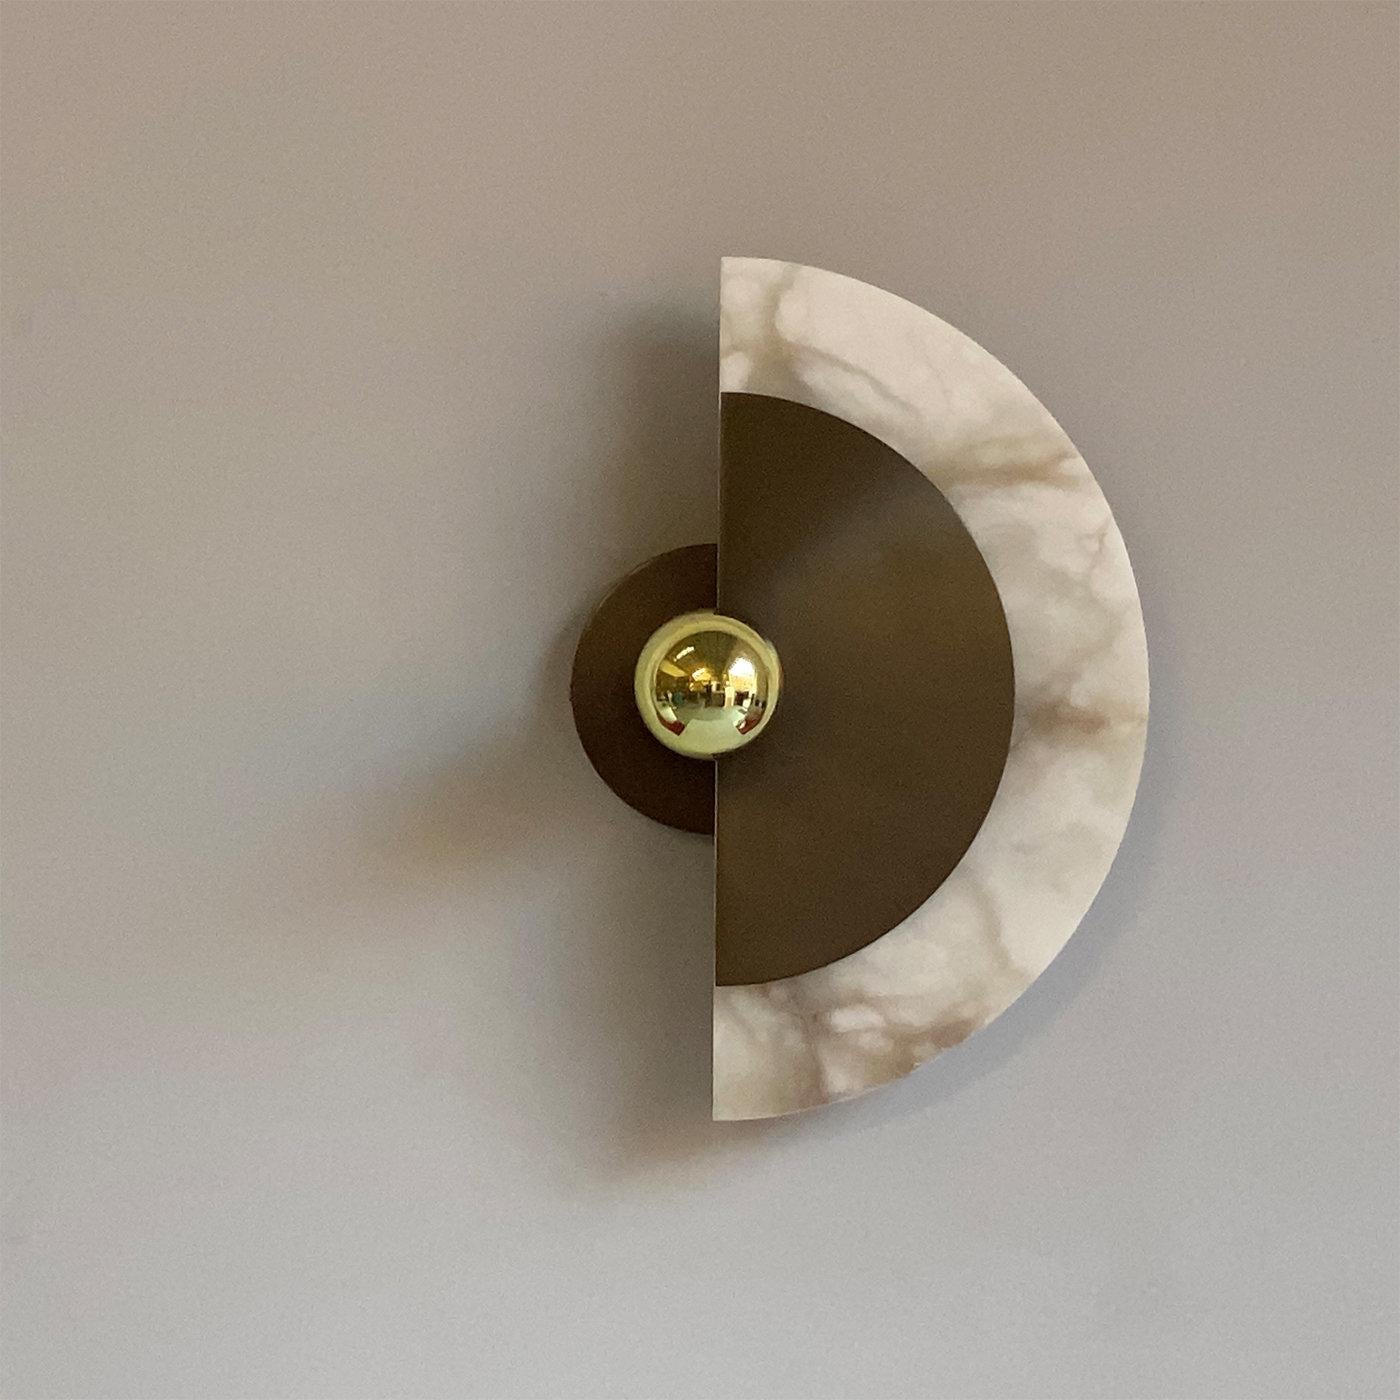 This charming wall sconce is truly ingenious in its unique design and craftsmanship. Featuring two half disks of elegant bronze and magnificent Italian alabaster. The disks can be rotated 30° on the central arm, forming a stunning interplay of